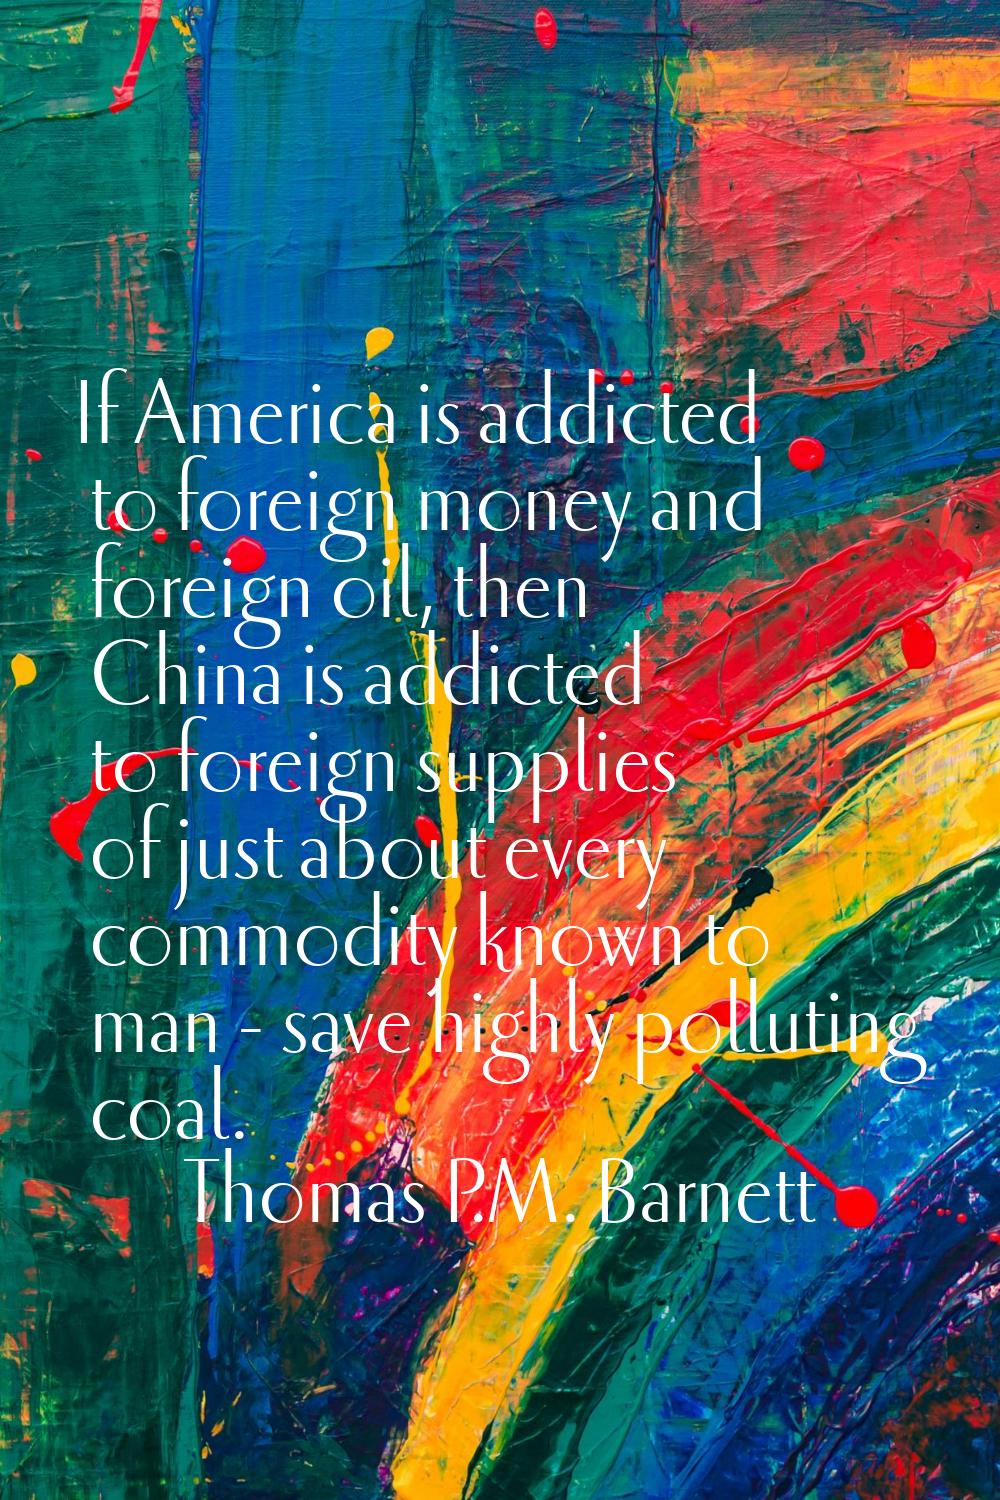 If America is addicted to foreign money and foreign oil, then China is addicted to foreign supplies